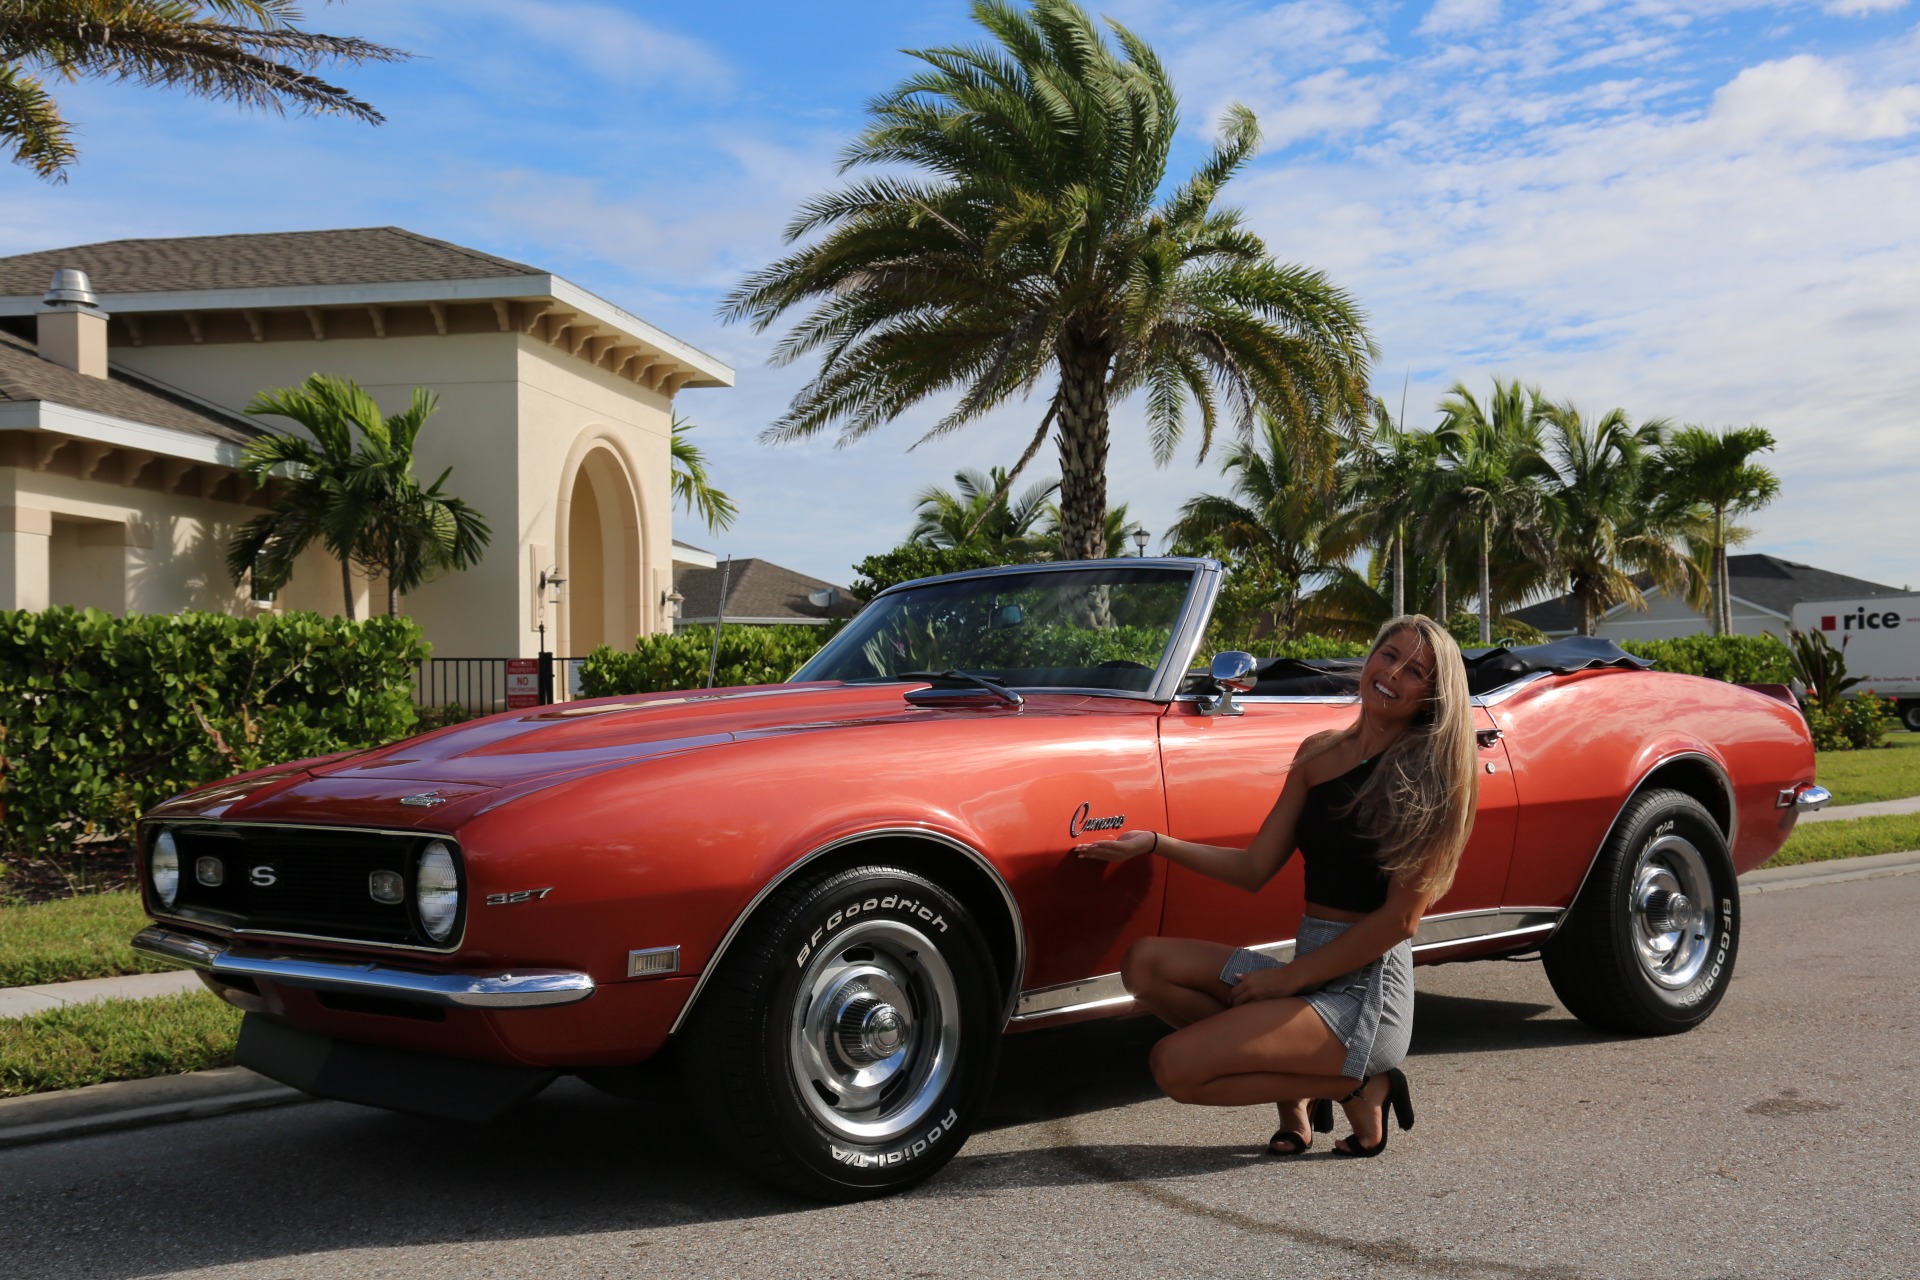 Used 1968 Chevy Camaro Convertible V8 Auto for sale Sold at Muscle Cars for Sale Inc. in Fort Myers FL 33912 1